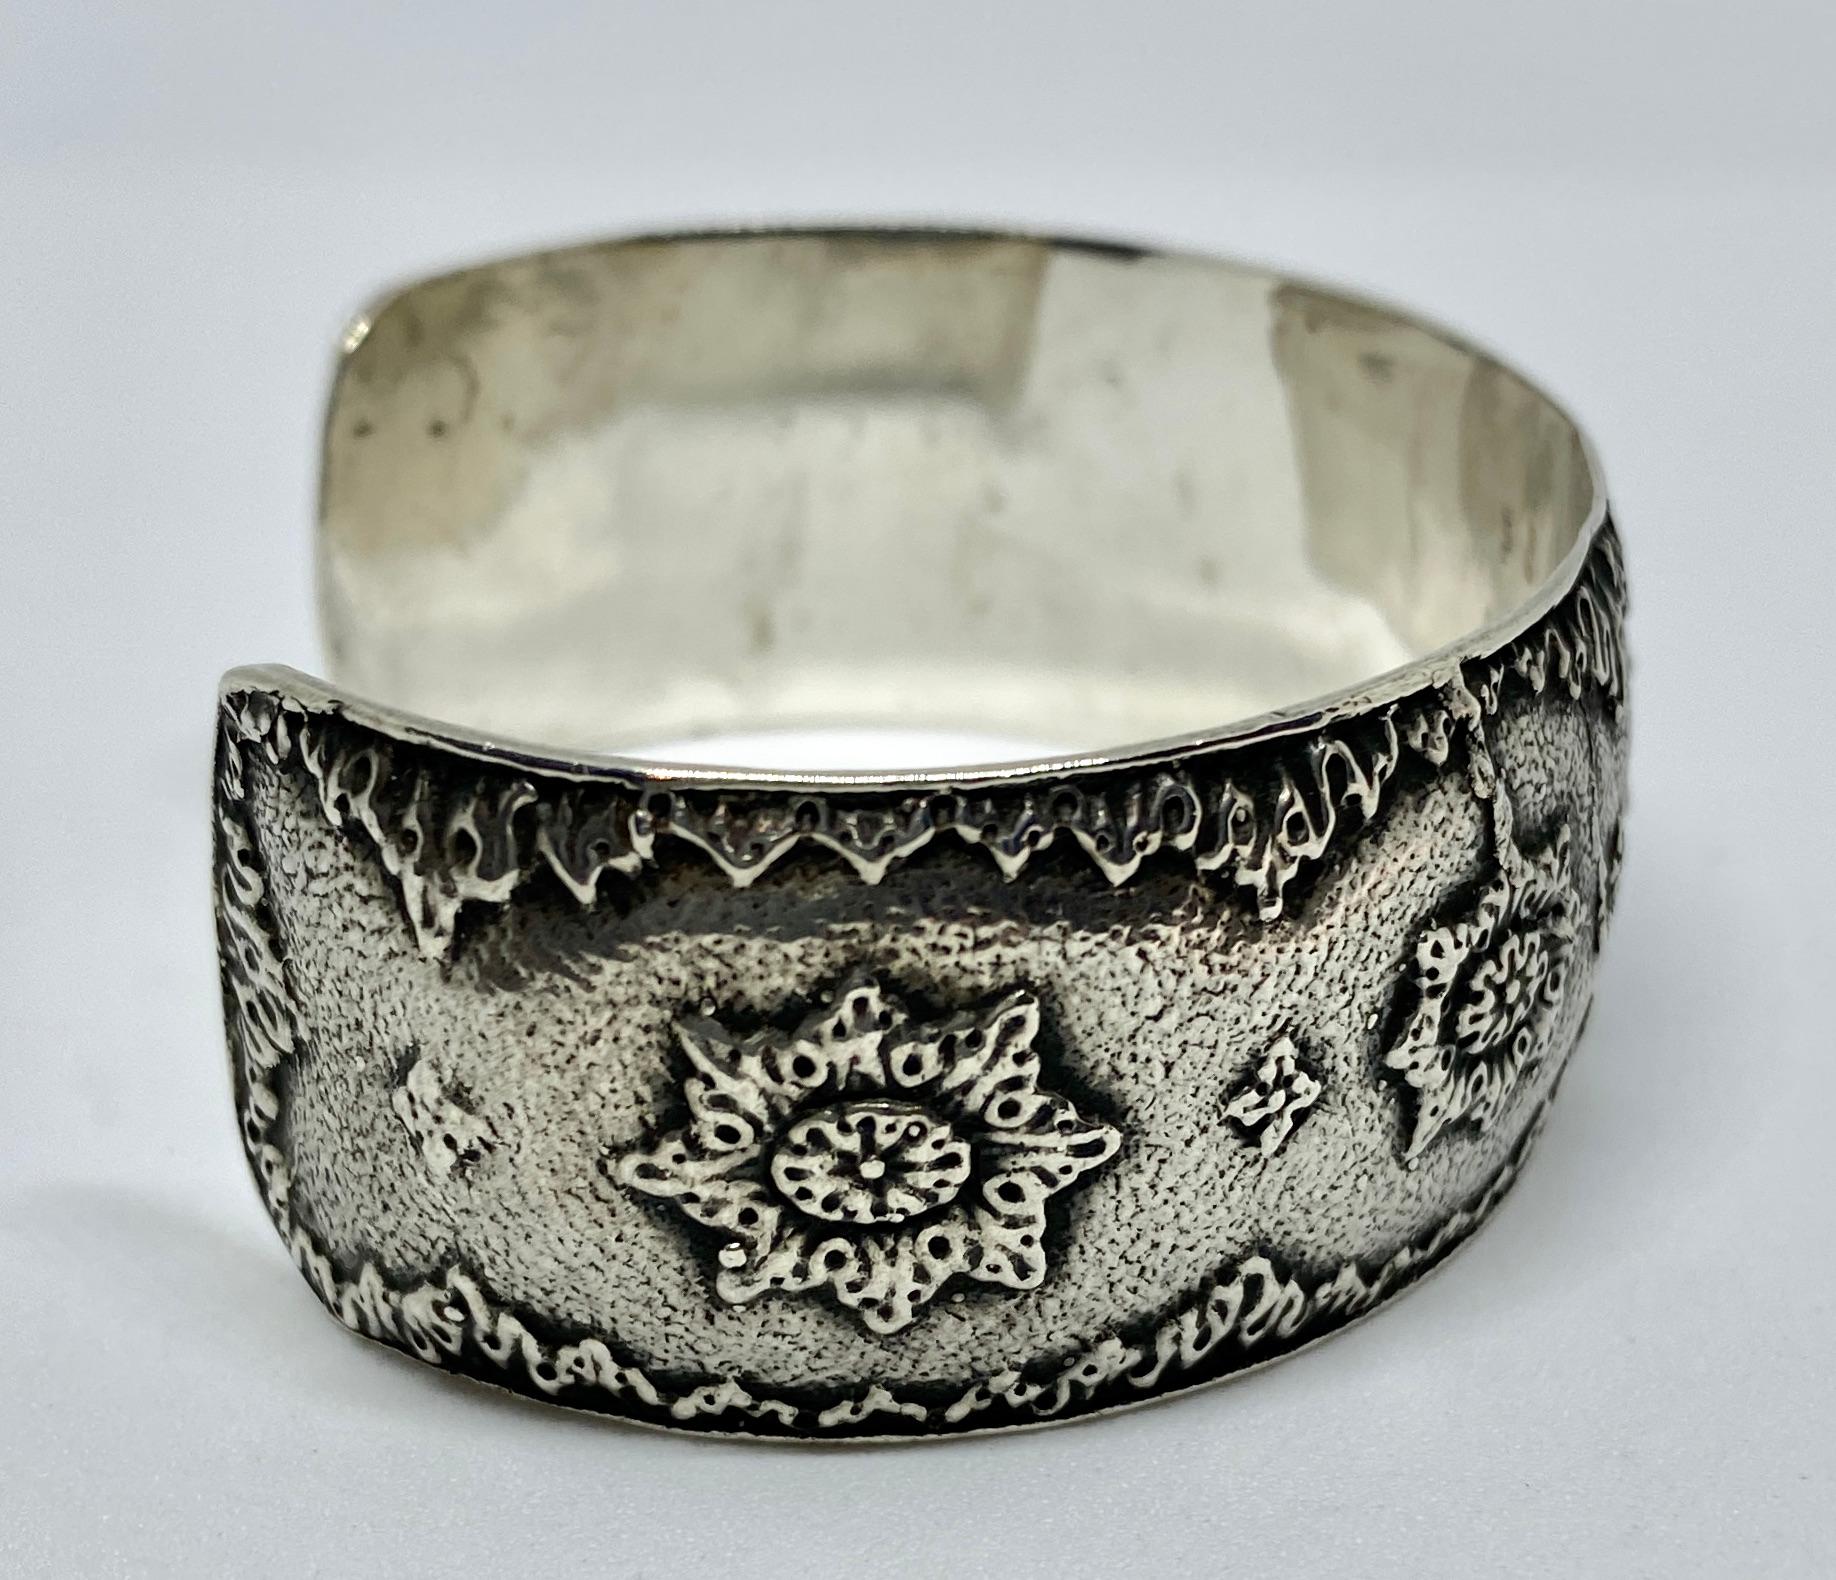 An extremely rare vintage Buccellati cuff bracelet created in sterling silver by the lost-wax process.

Signed FEDERICO BUCCELLATI, 925 and 1169 MI (the maker's mark), we believe this bracelet may have been an archival piece or a model for a gold